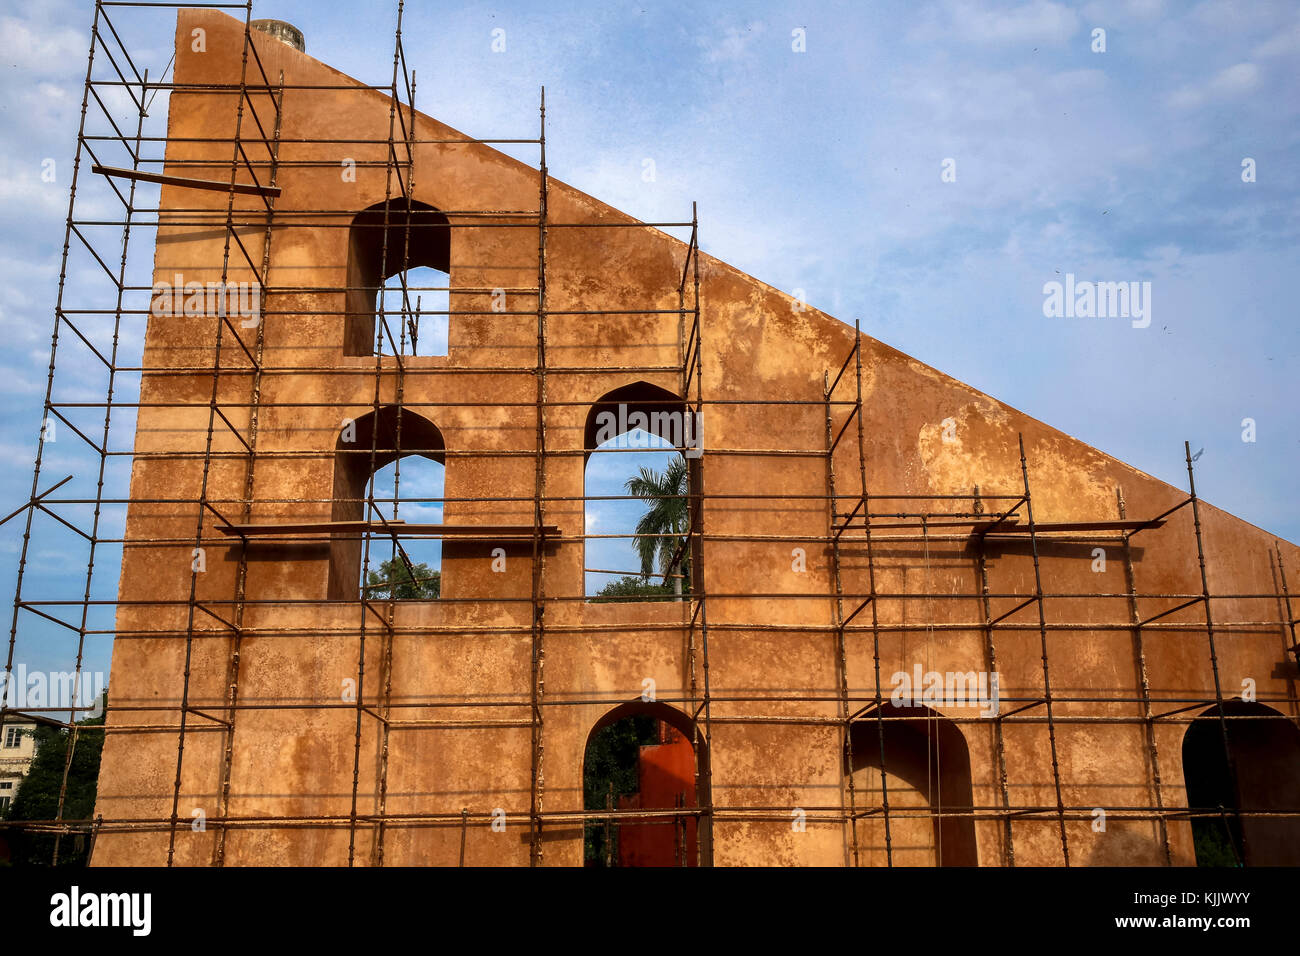 Located in Delhi, Jantar Mantar consists of 13 architectural astronomy instruments. The site is one of five built by Maharaja Jai Singh II of Jaipur. Stock Photo